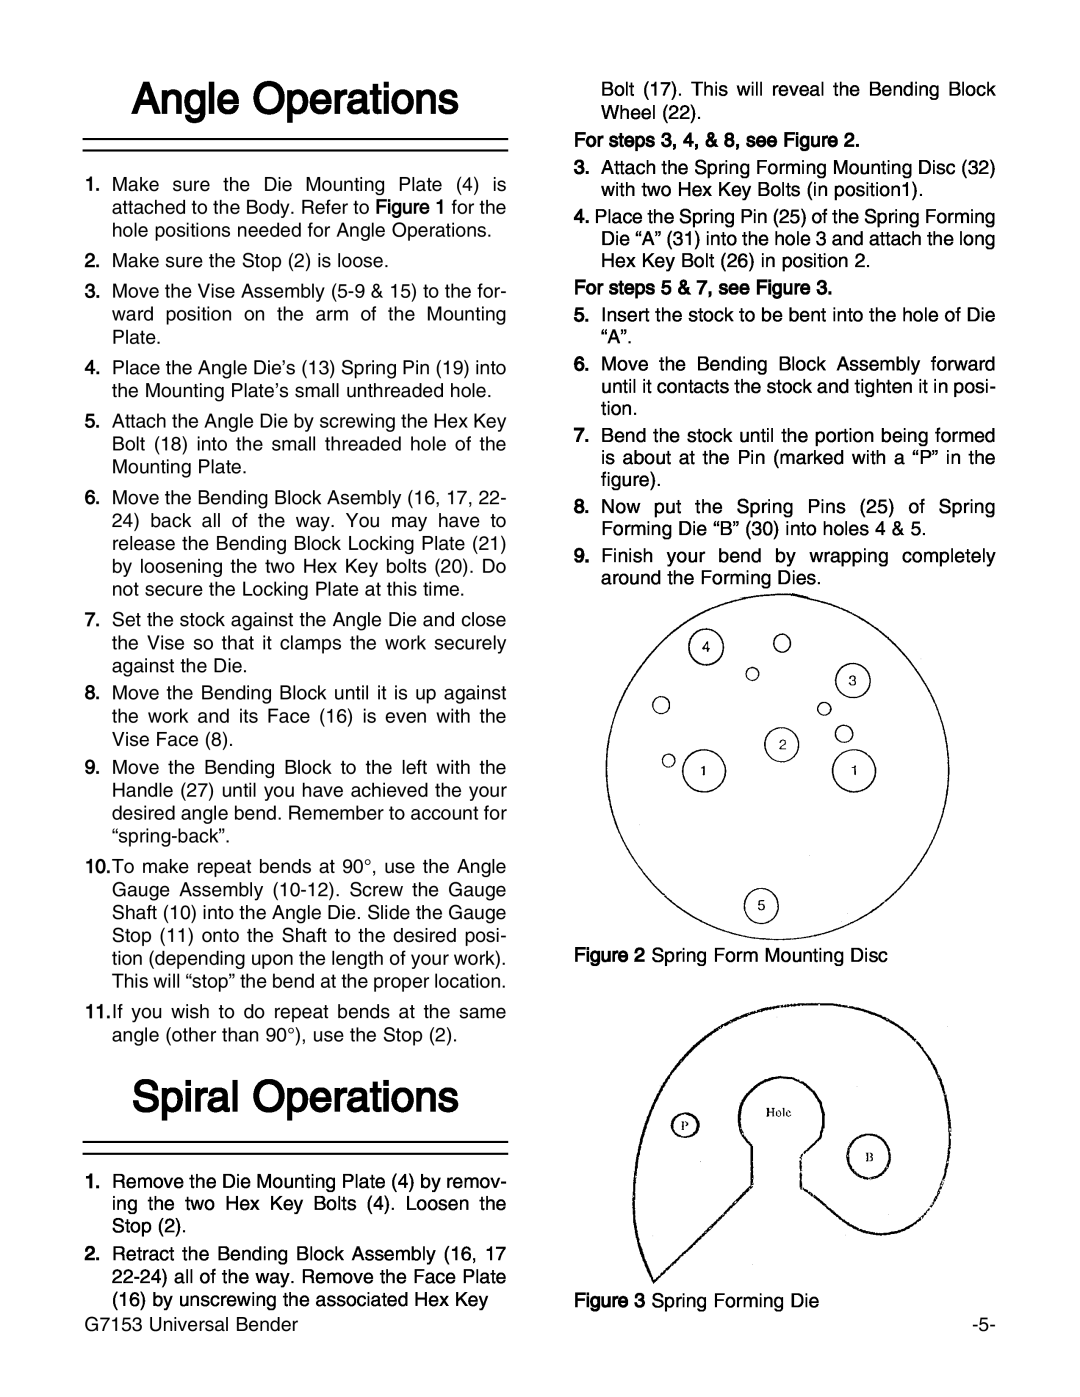 Grizzly G7153 manual Angle Operations, Spiral Operations 